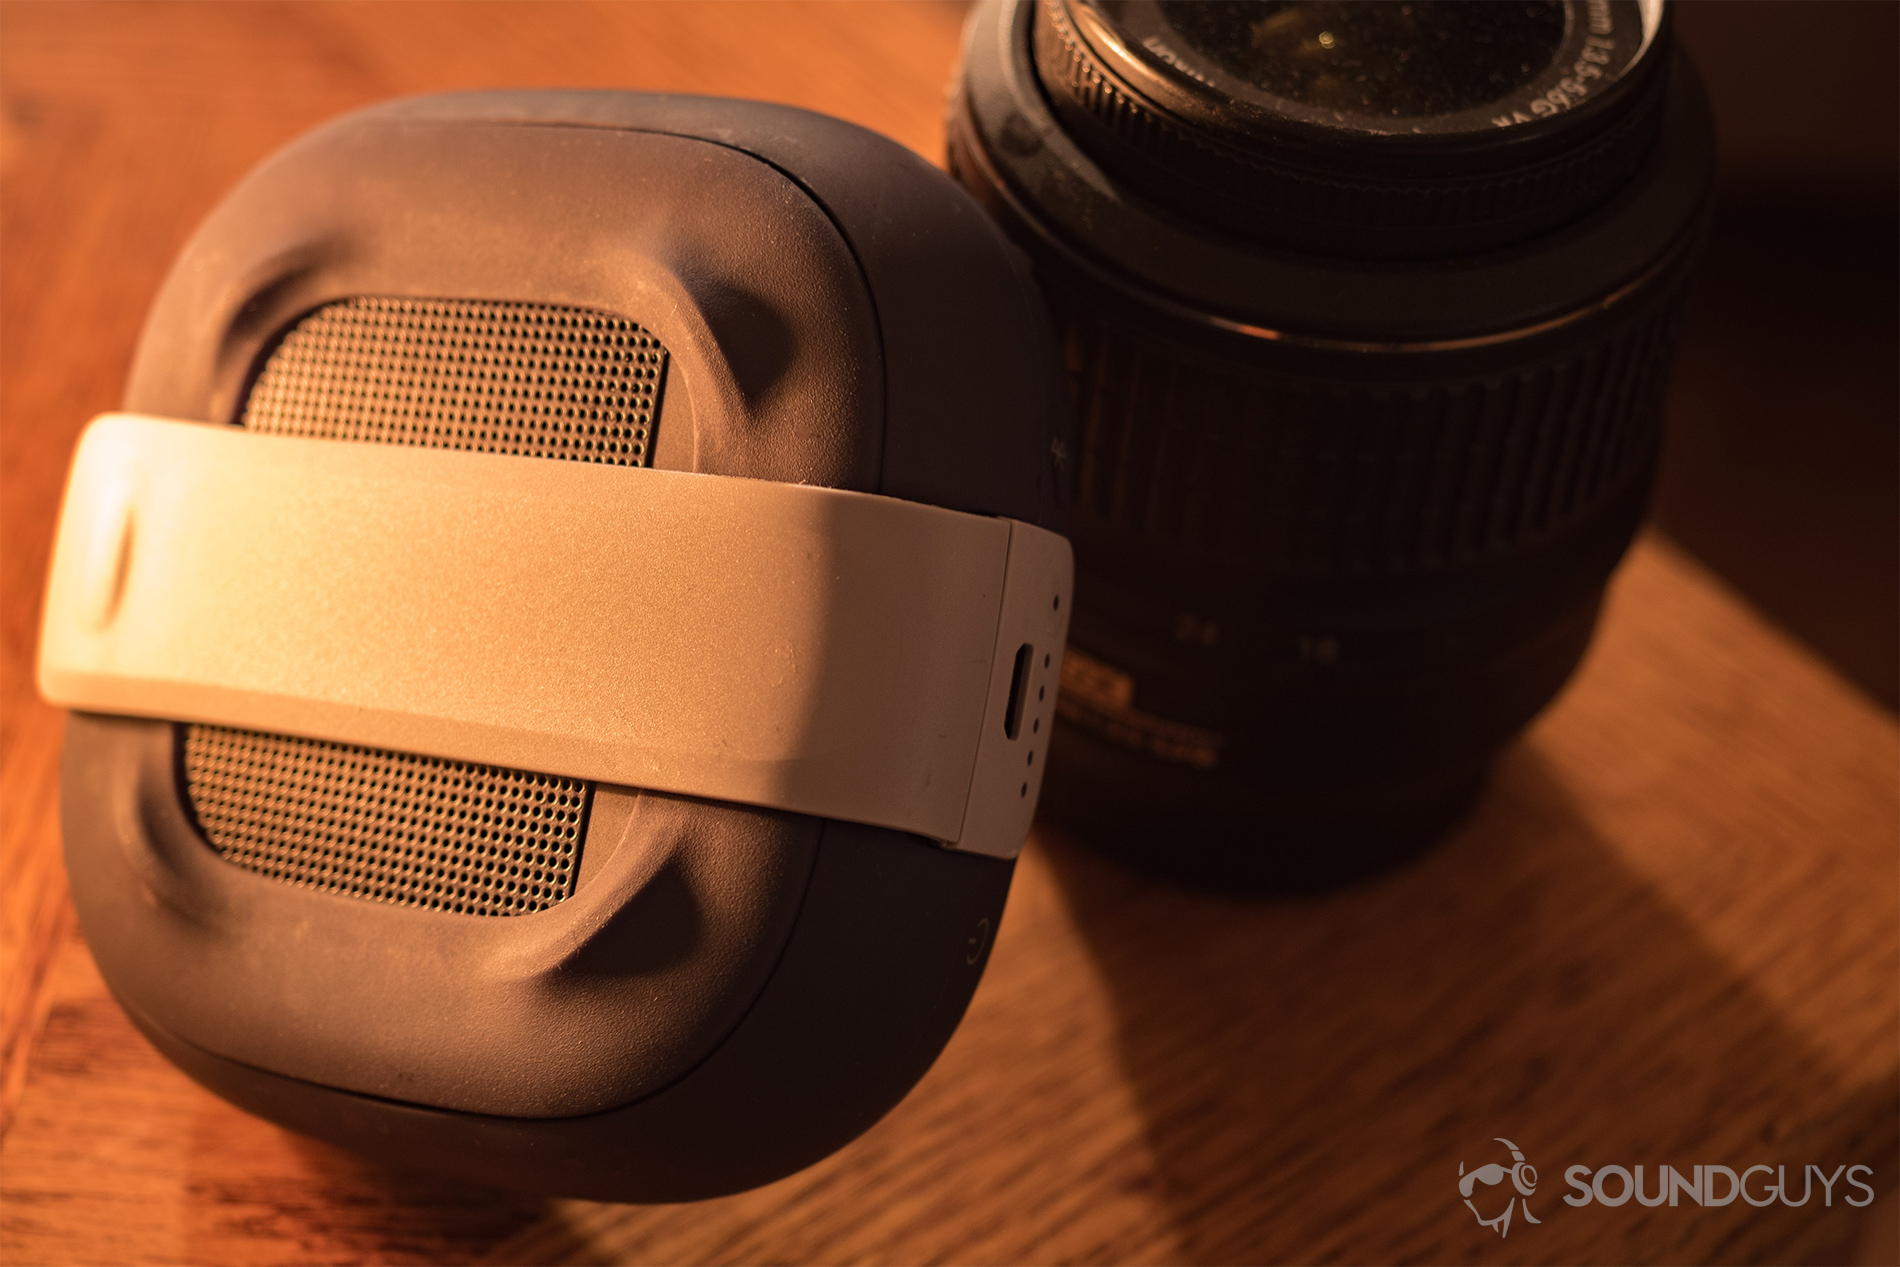 The Bose SoundLink Micro (blue) leaning against a Nikon kit lens in candle light.